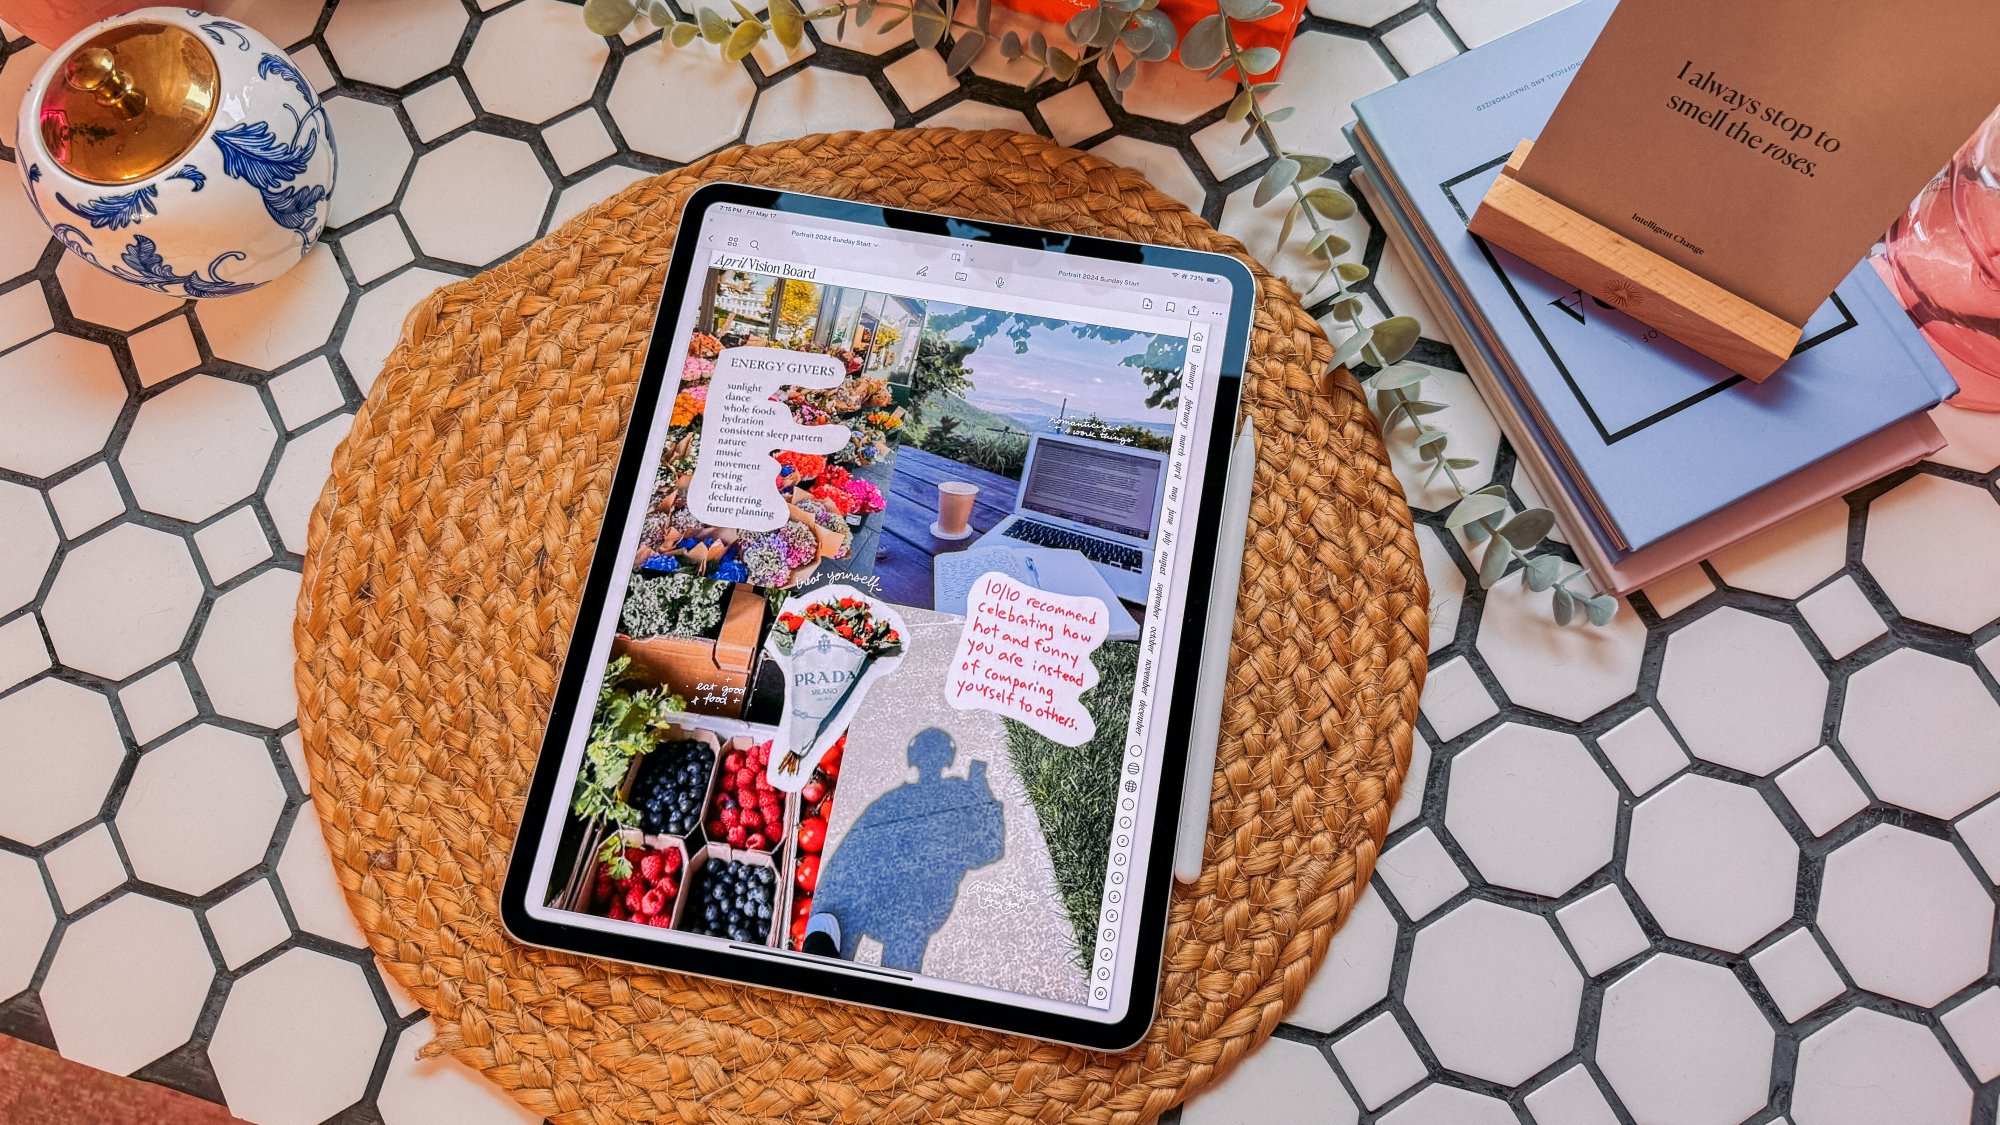 Vision Boarding on the 13-inch iPad Air